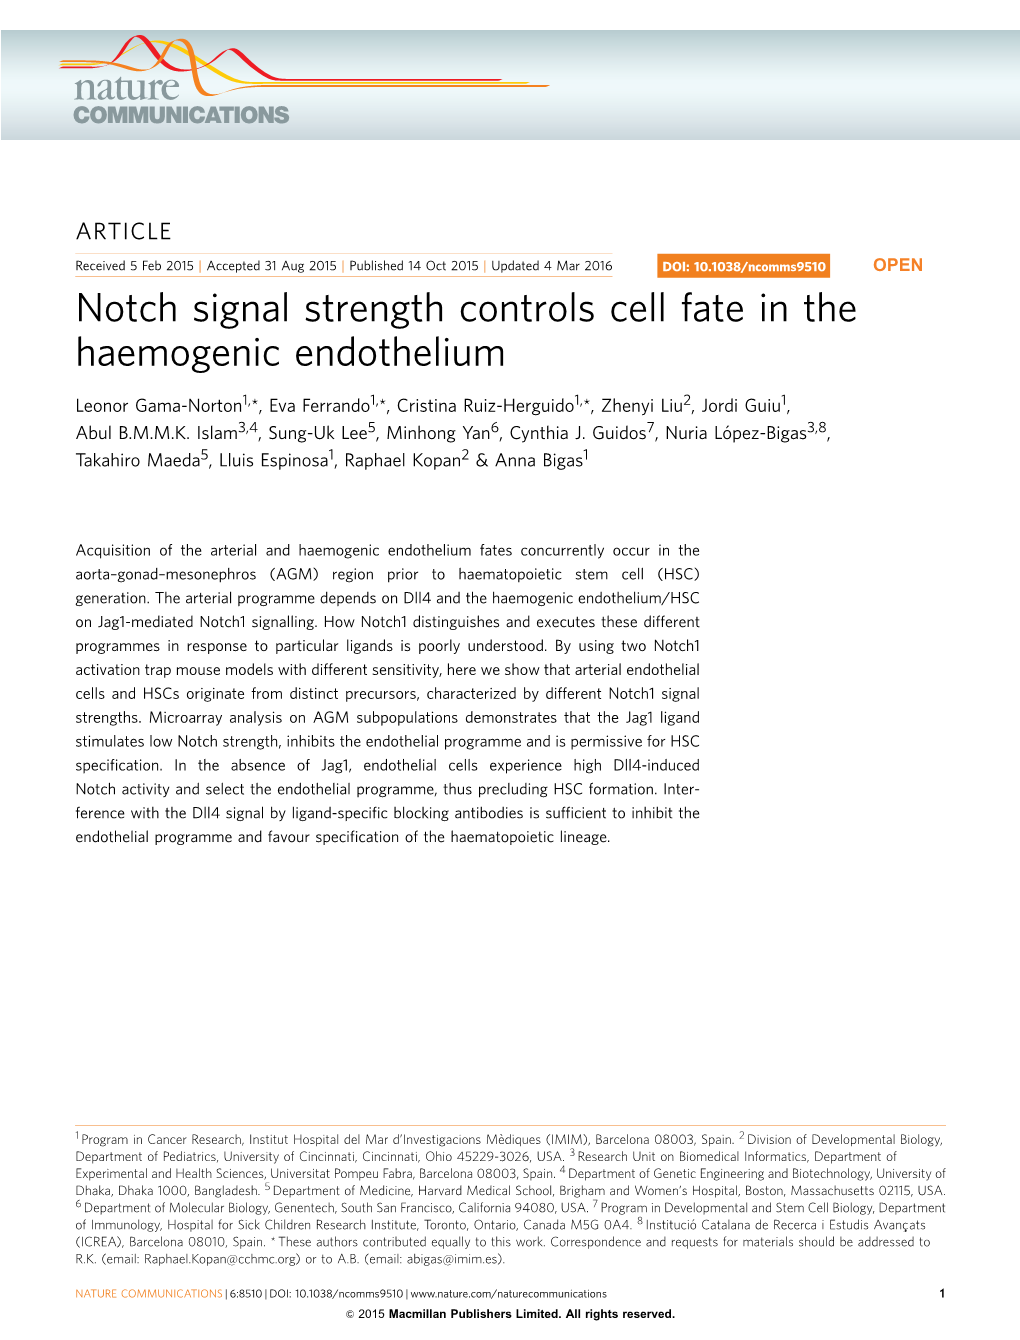 Notch Signal Strength Controls Cell Fate in the Haemogenic Endothelium